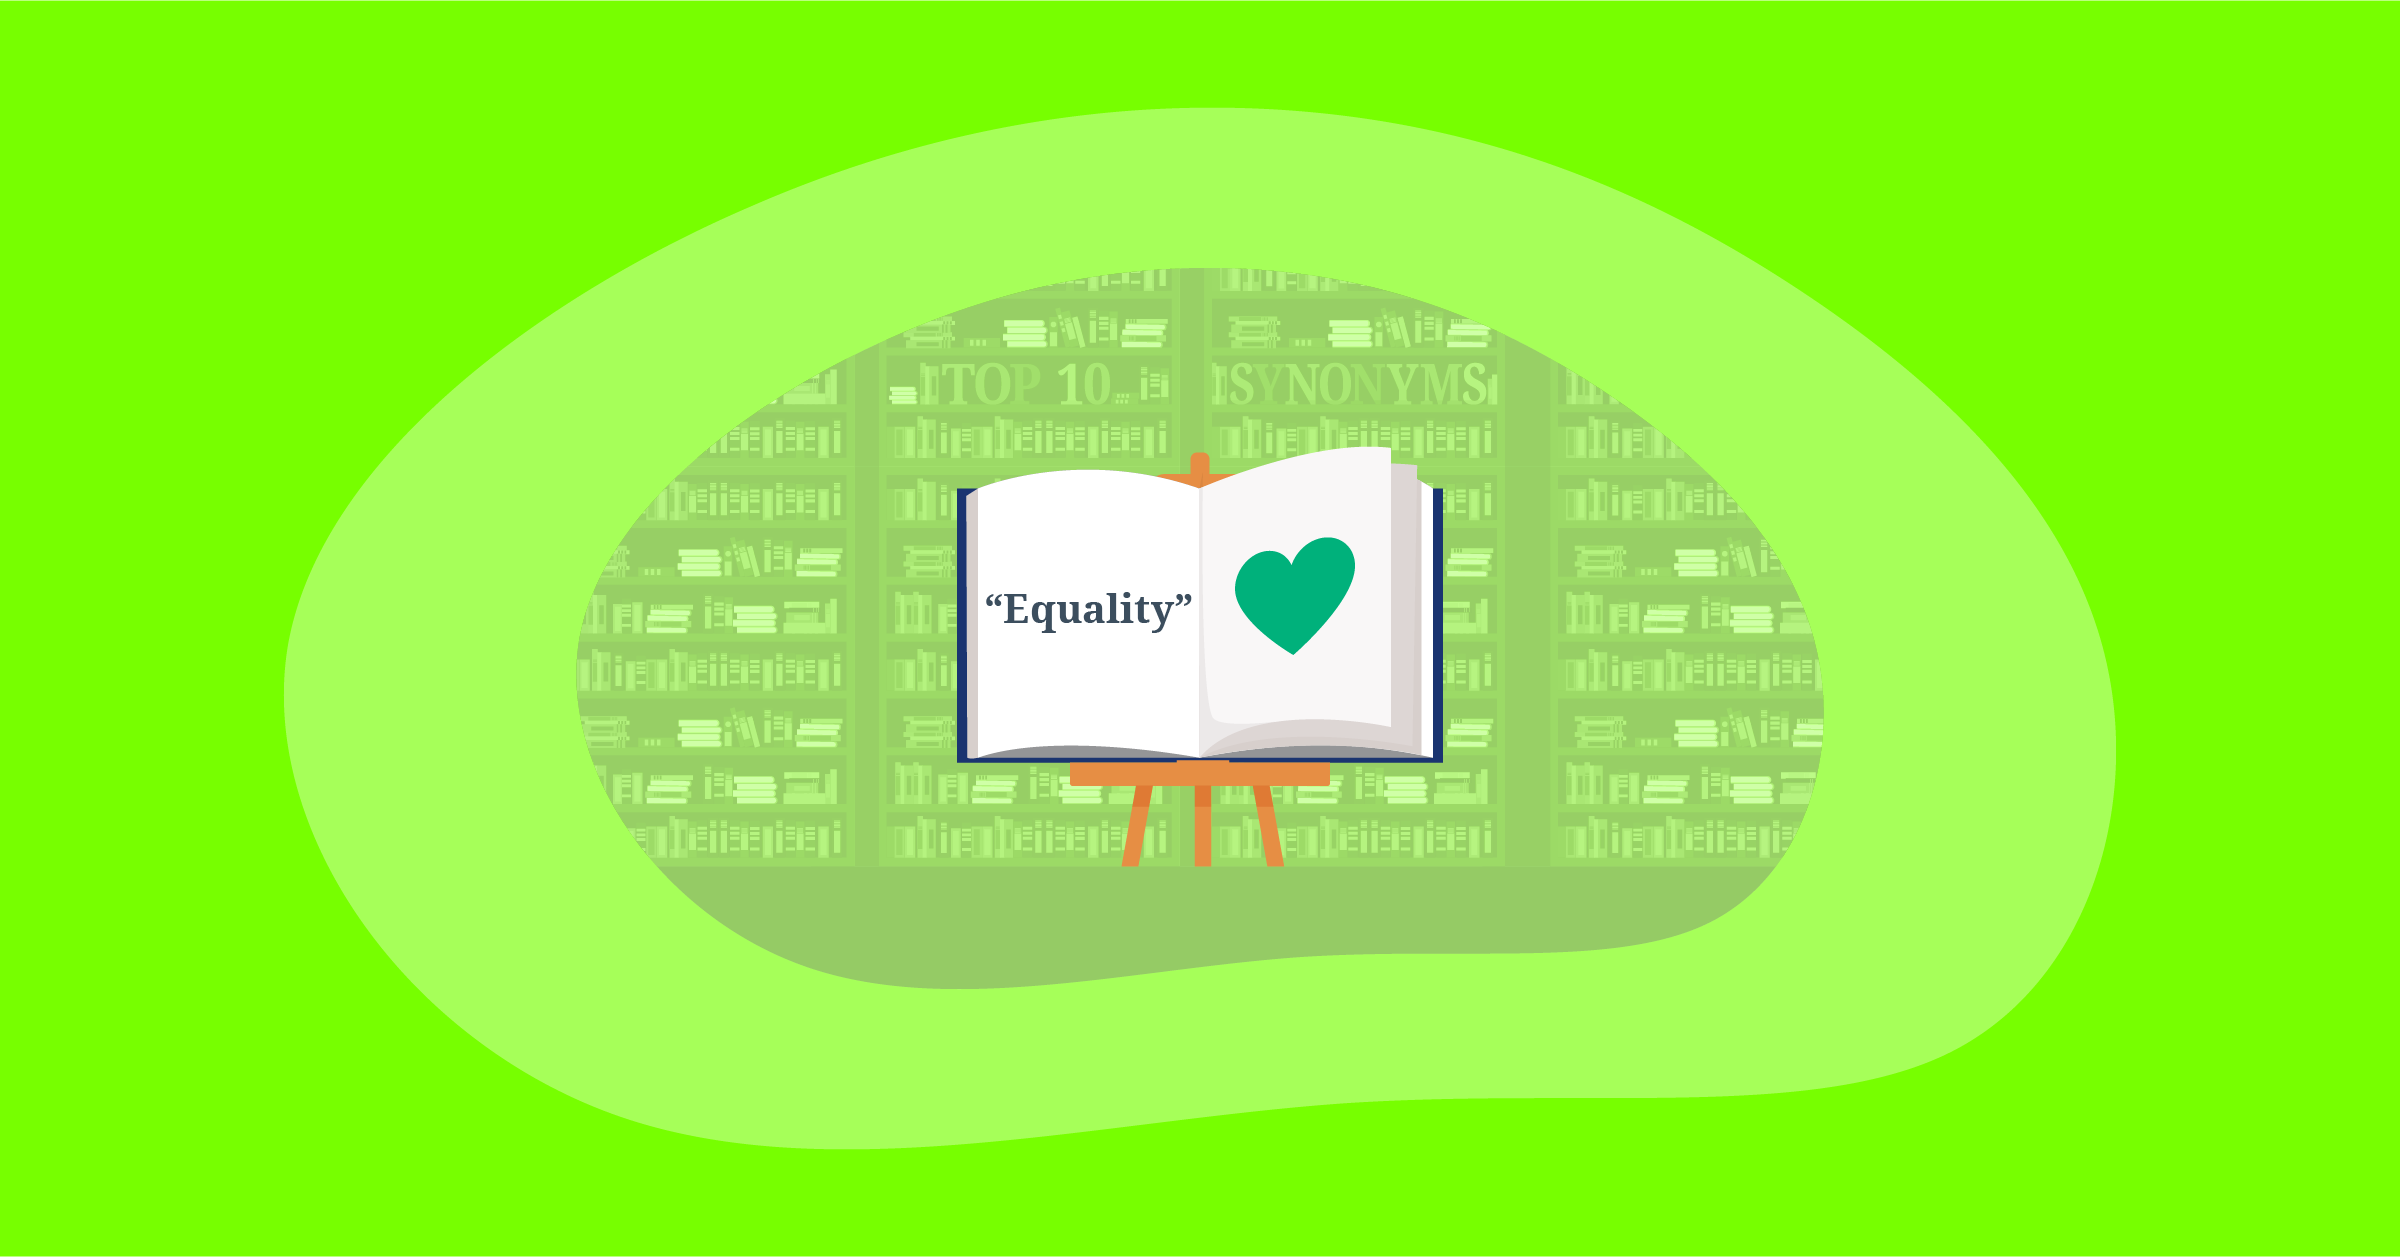 Illustration for top 10 positive impactful words for "Equality"